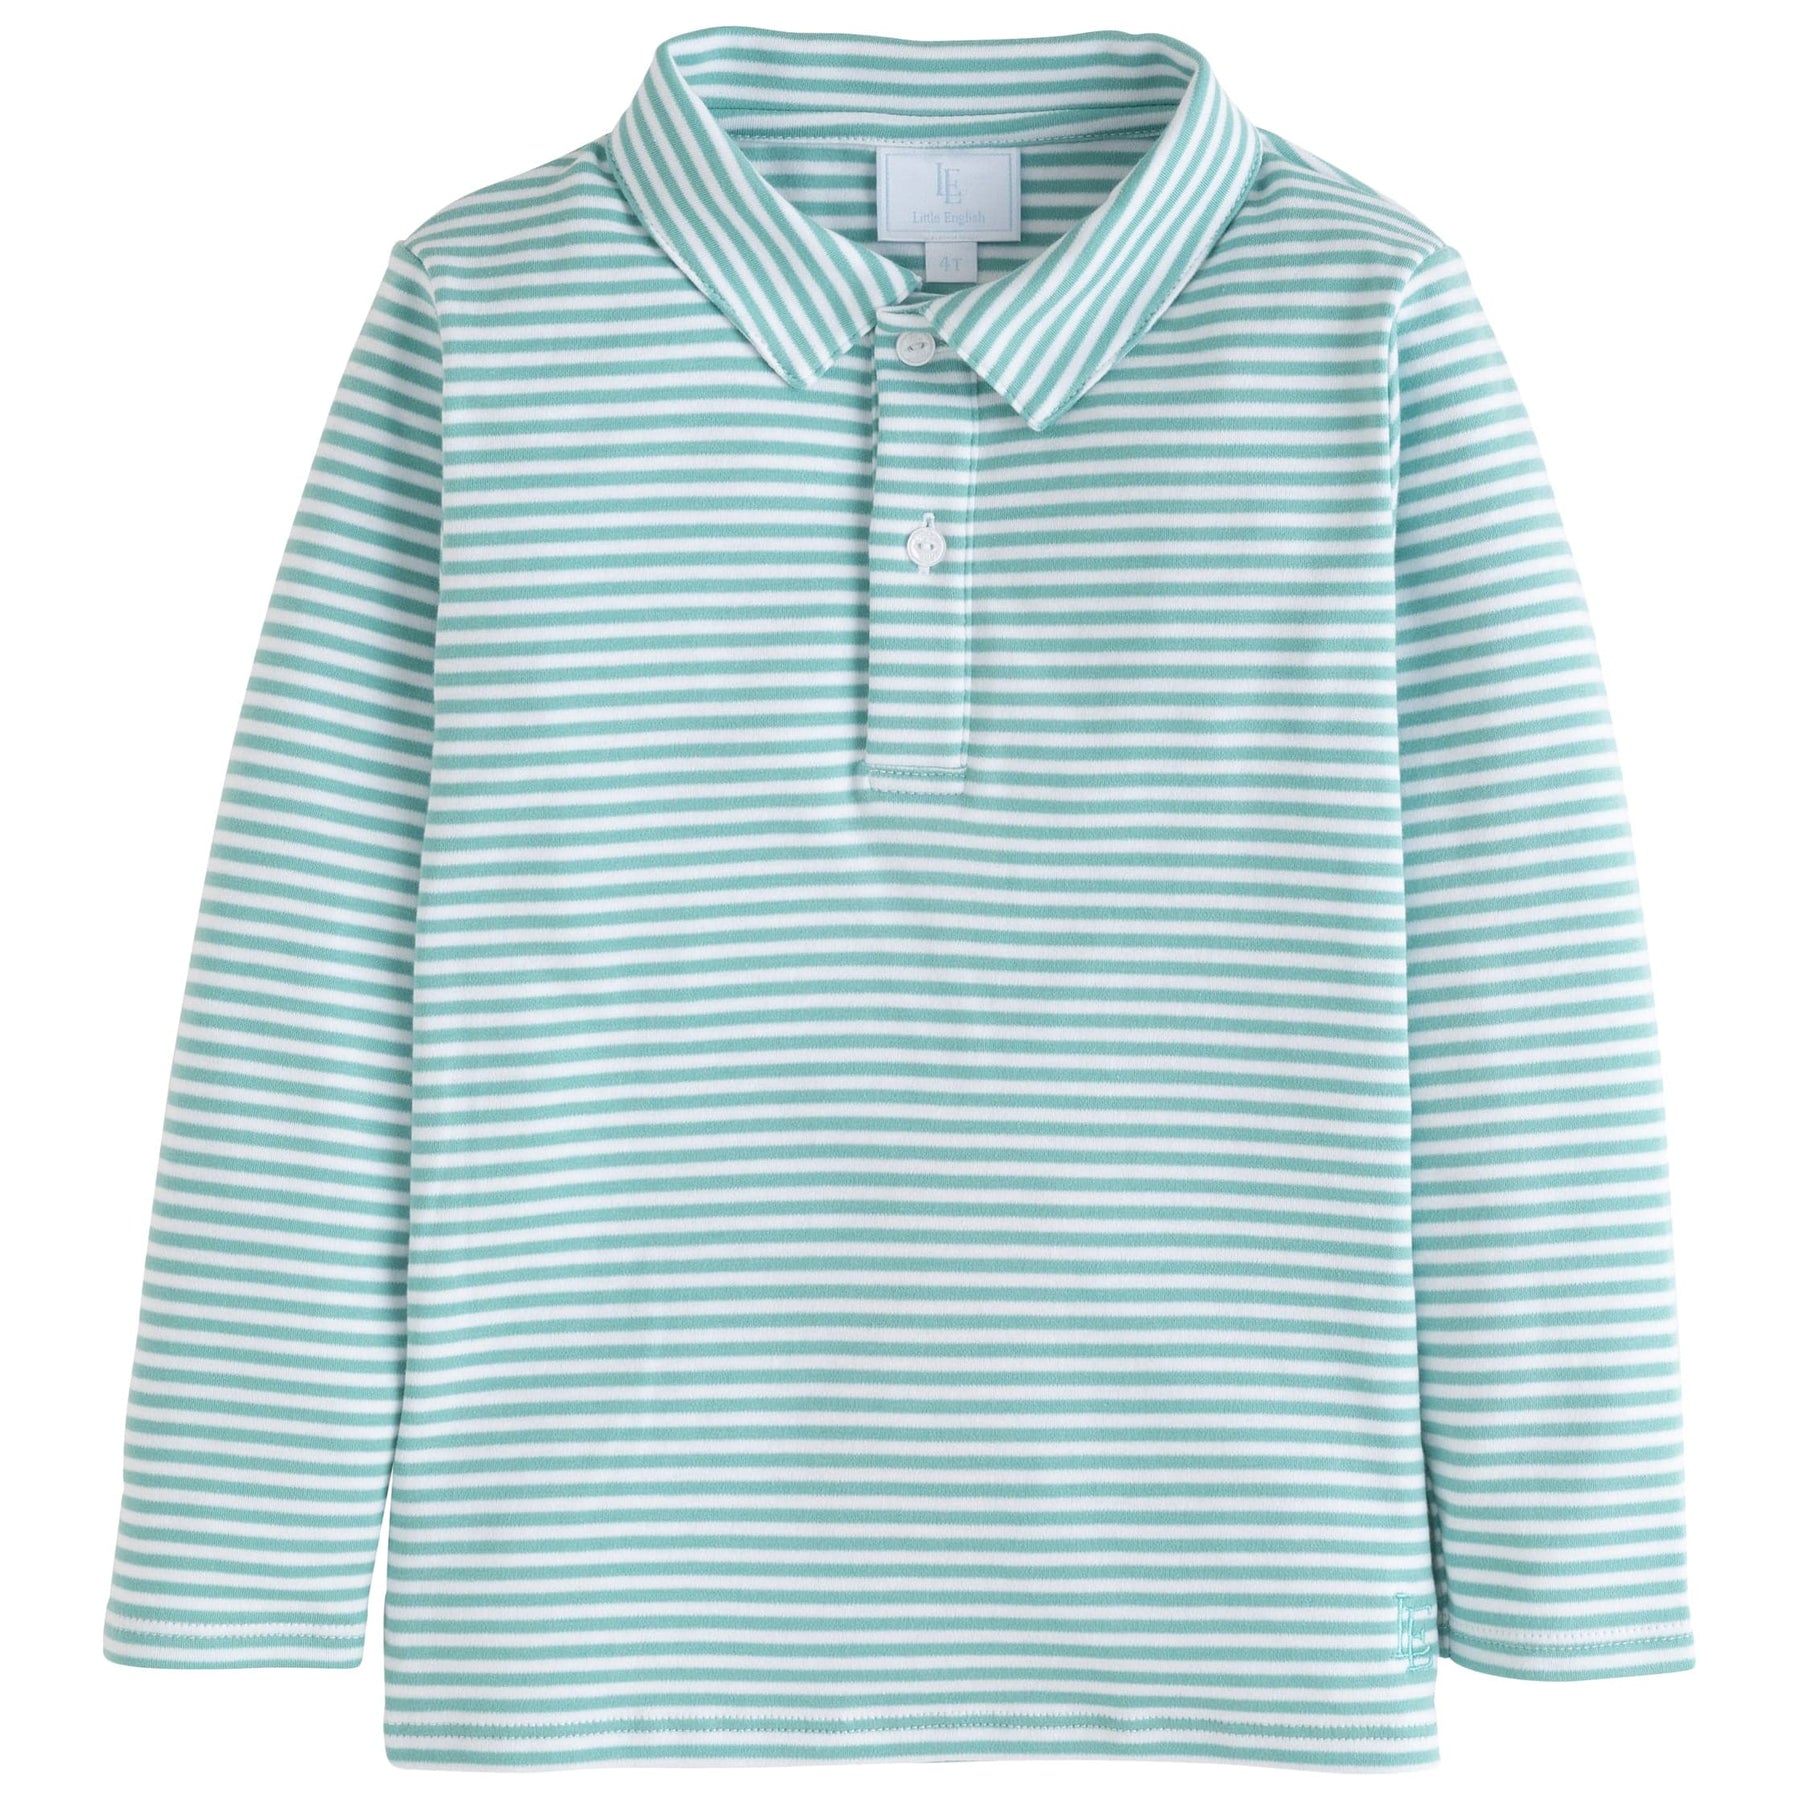 seguridadindustrialcr classic childrens clothing boys green/blue and white striped long sleeve polo